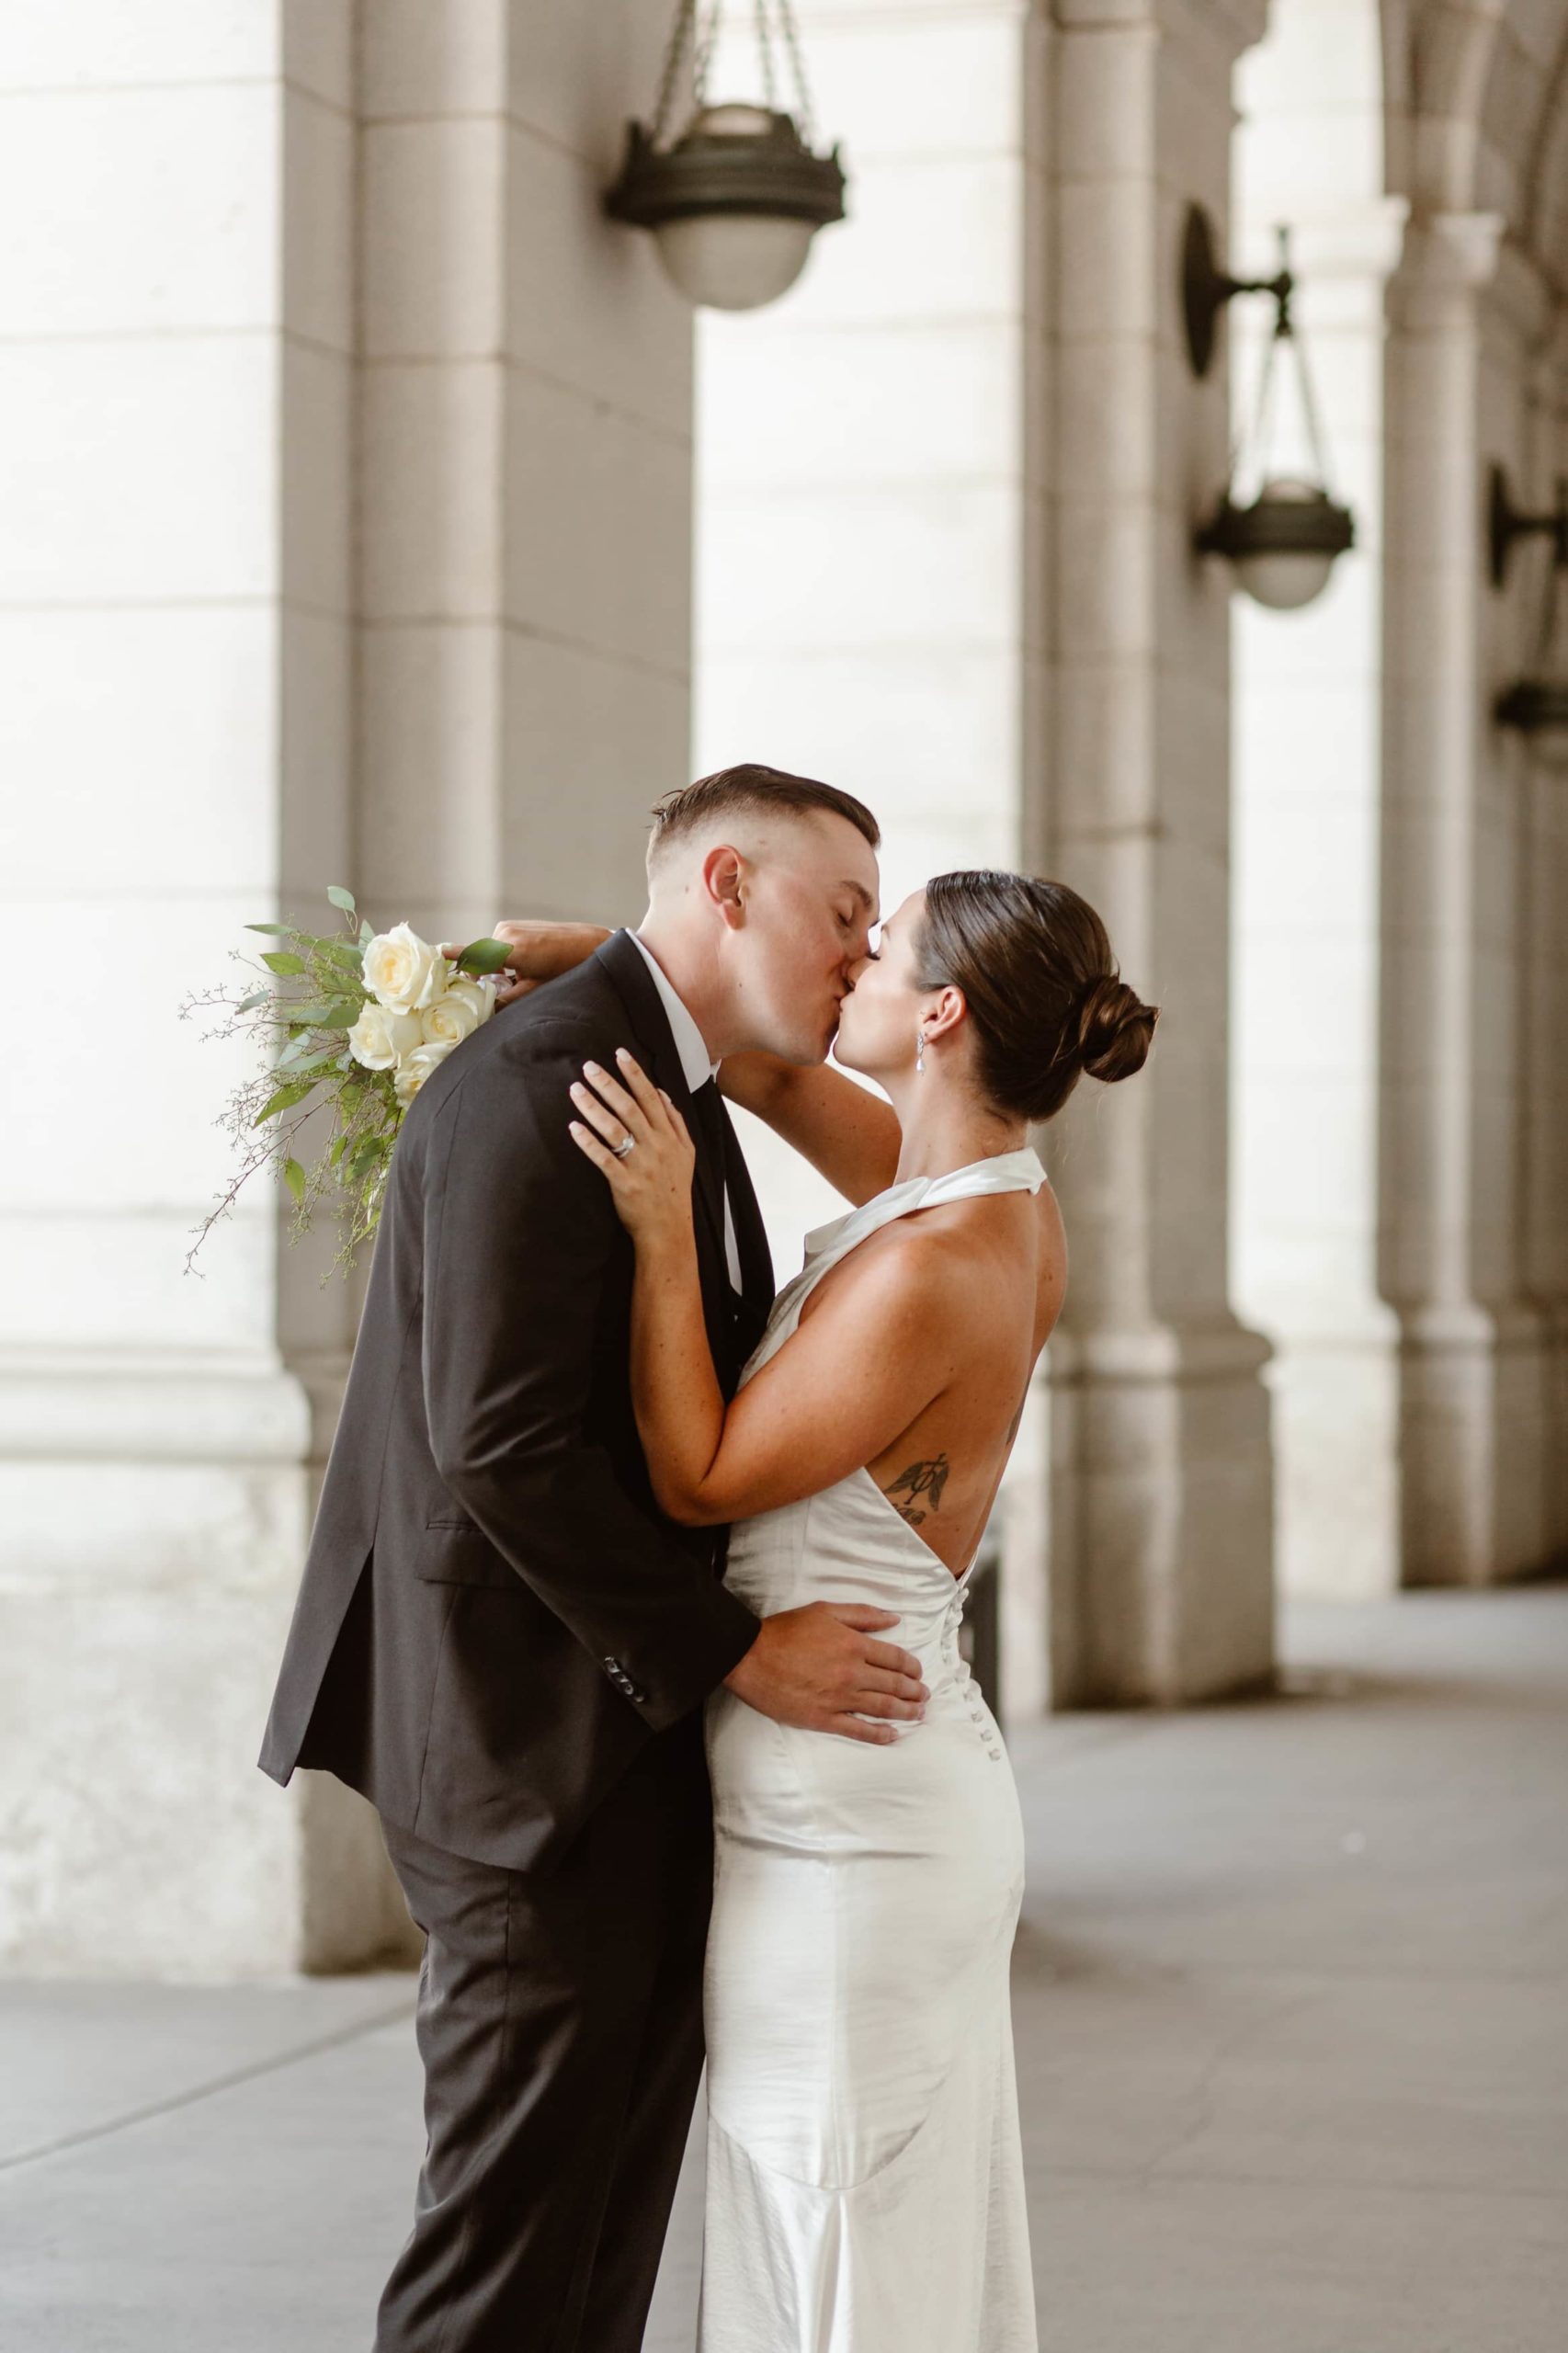 Wedding couple kiss at Union Station in DC